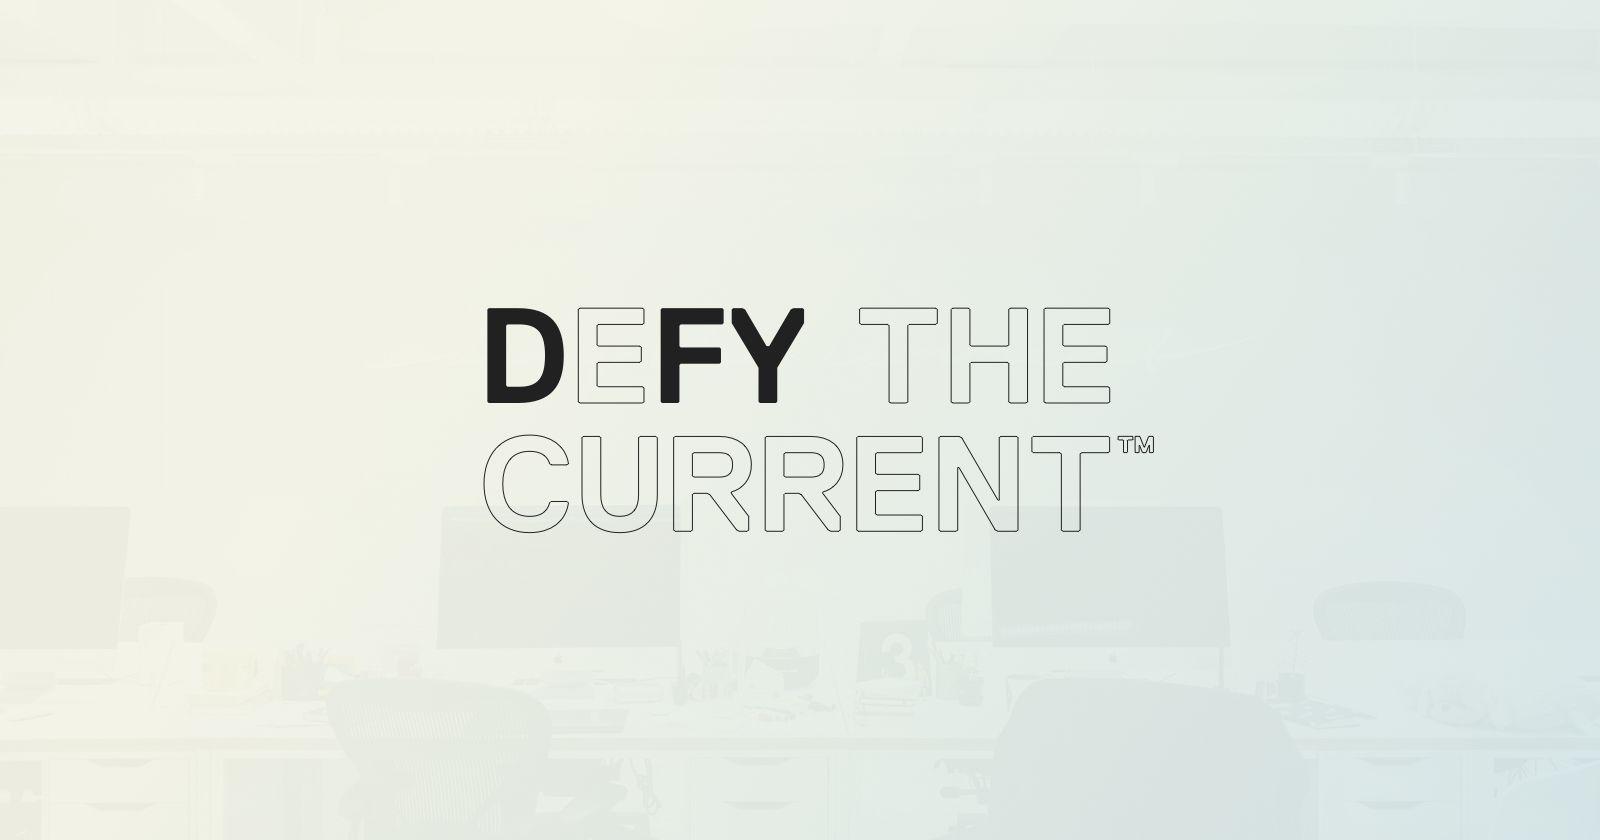 FY Logo - D.FY. DEFY THE CURRENT™